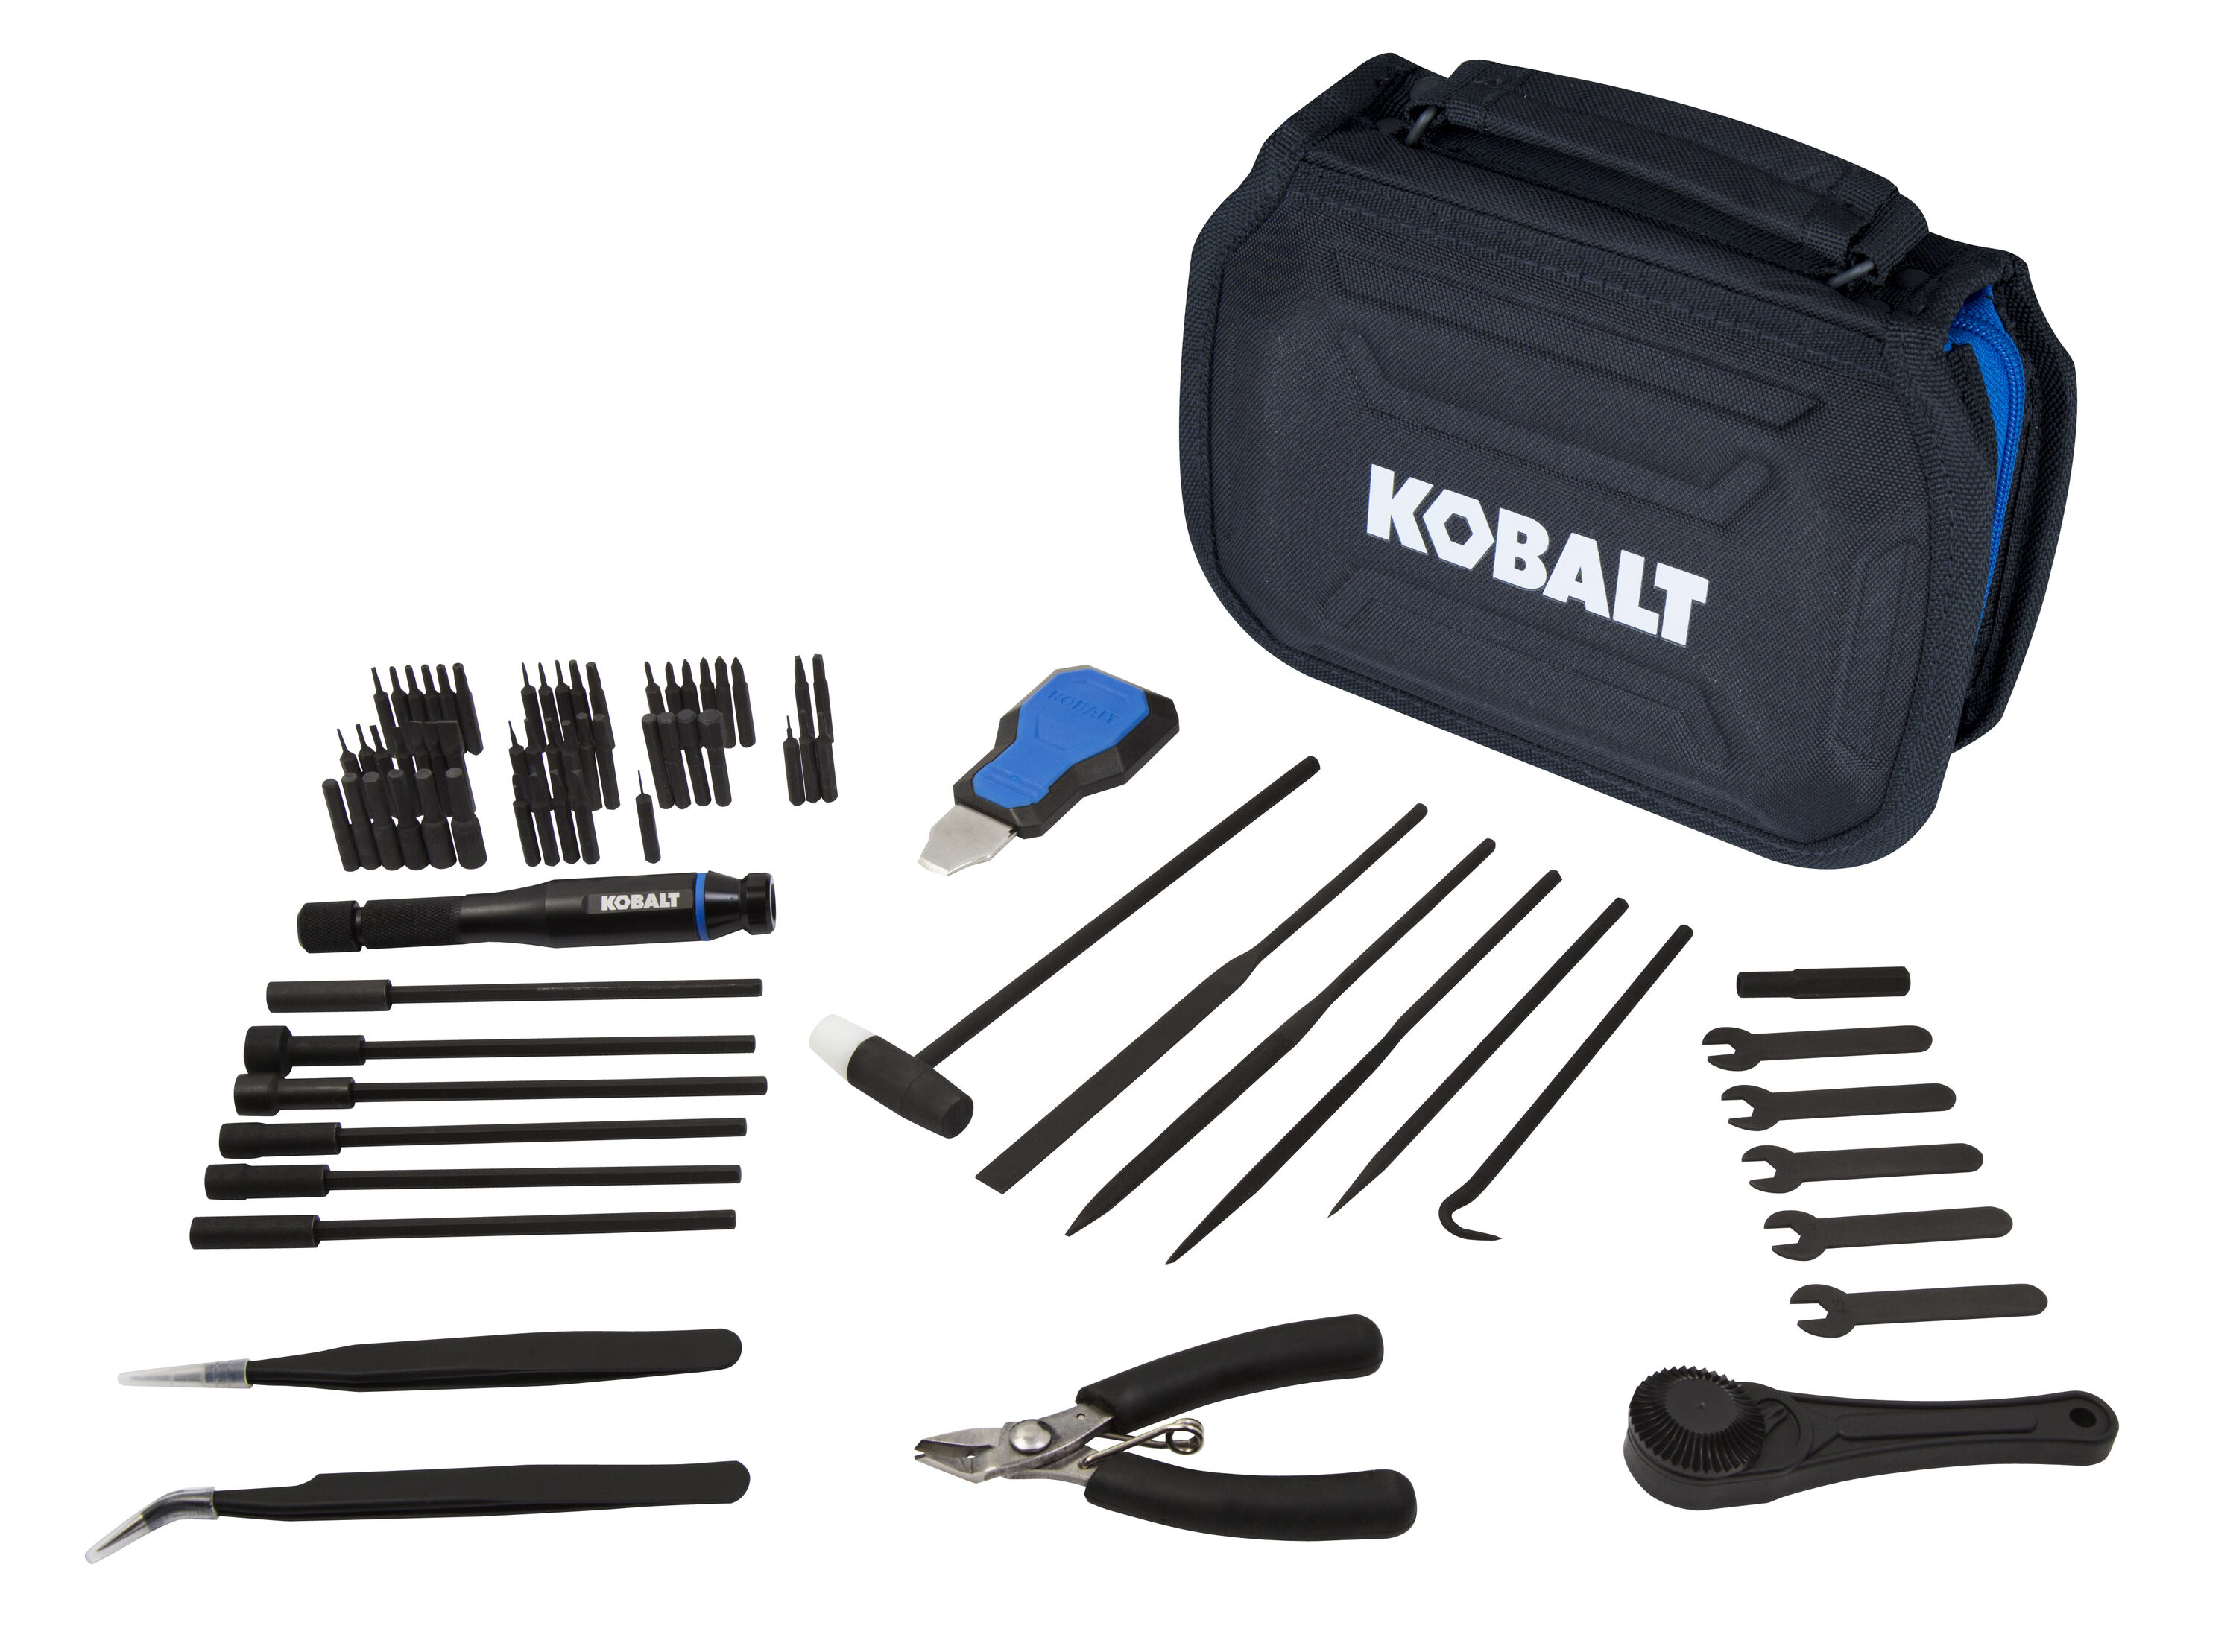 Model Tools Kit 15 Pieces Basic Tools Craft Set Hobby Building Tools Kit  For Car Model Building Repairing Model Basic Tools Hobby Building Tools Car